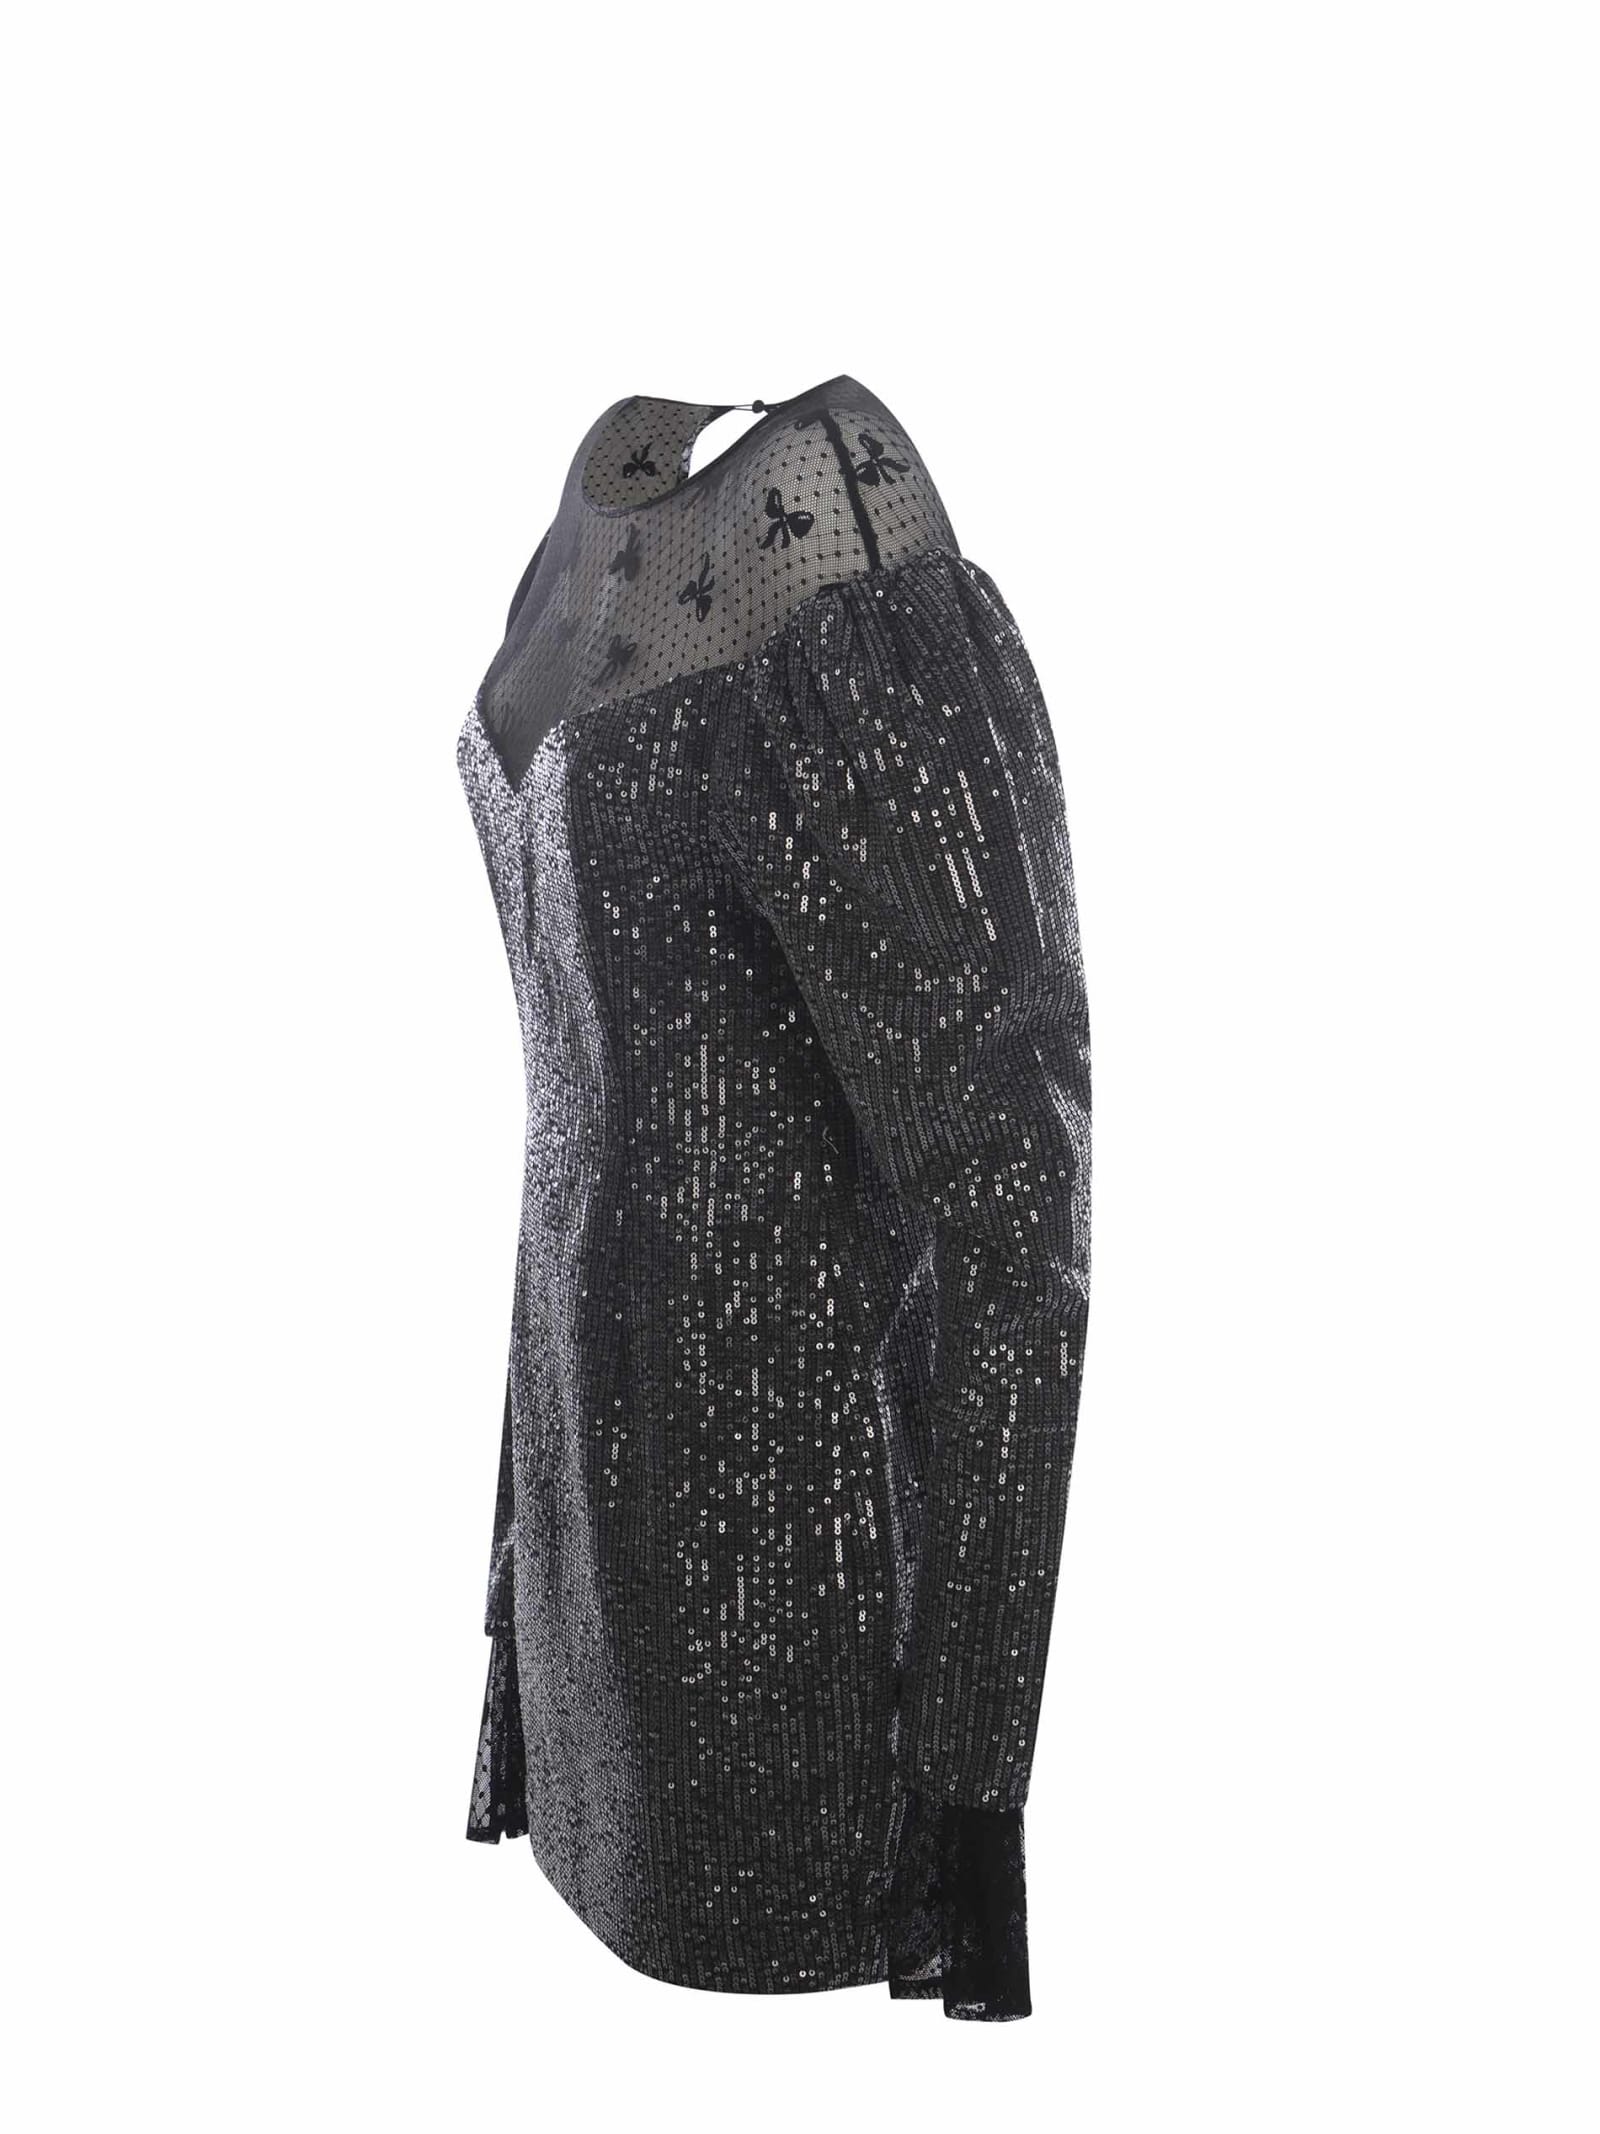 Shop Rotate Birger Christensen Dress Rotate Sequins Made Of Twill In Nero